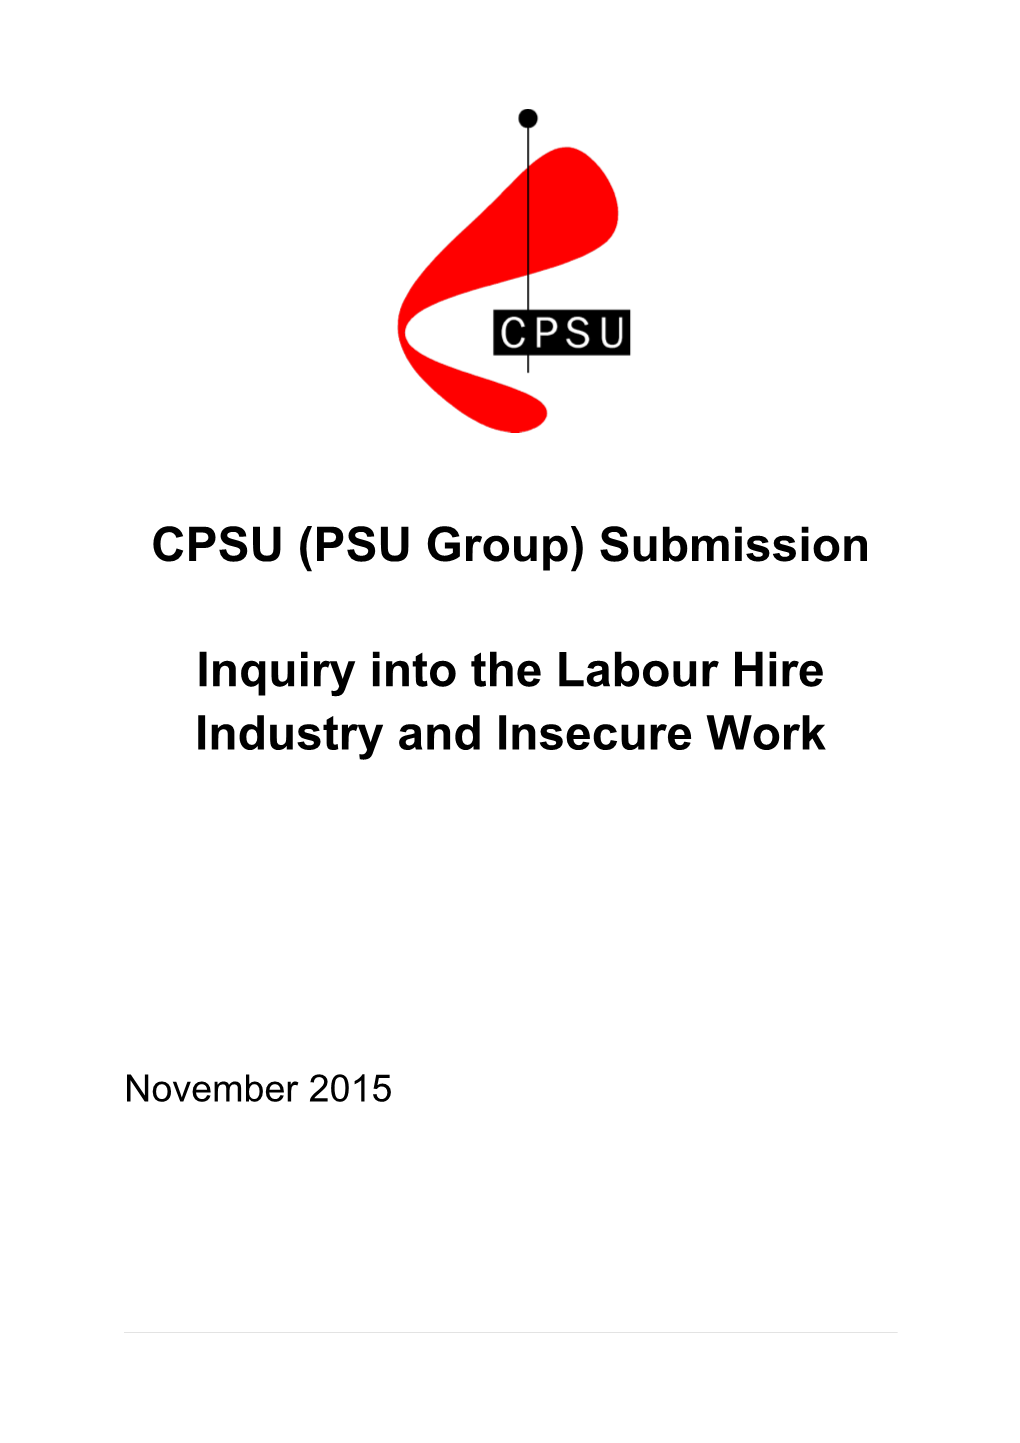 Inquiry Into the Labour Hire Industry and Insecure Work